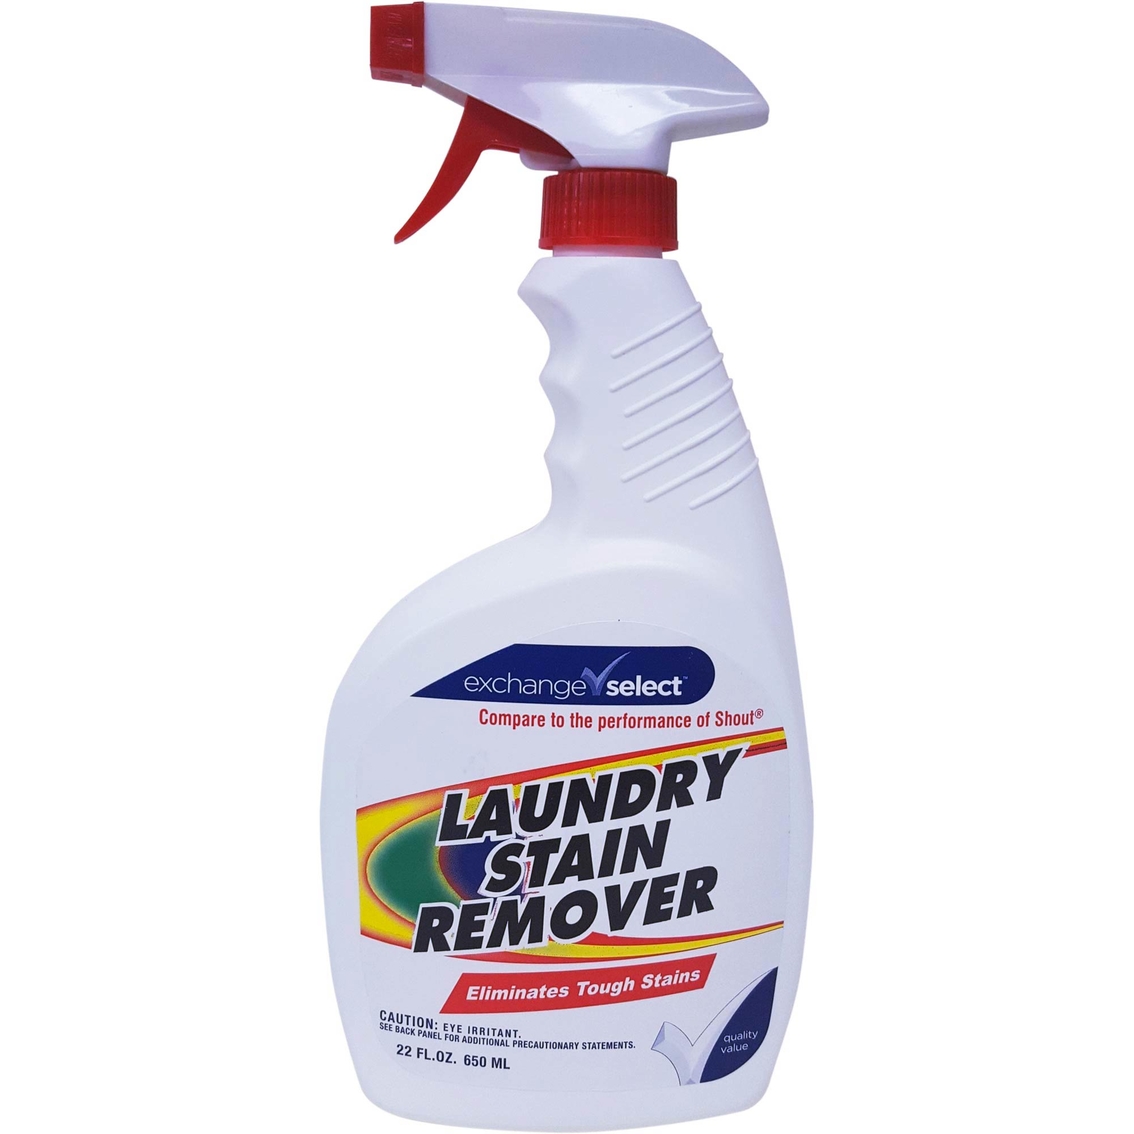 Shout Free Laundry Stain Remover - 22 fl oz